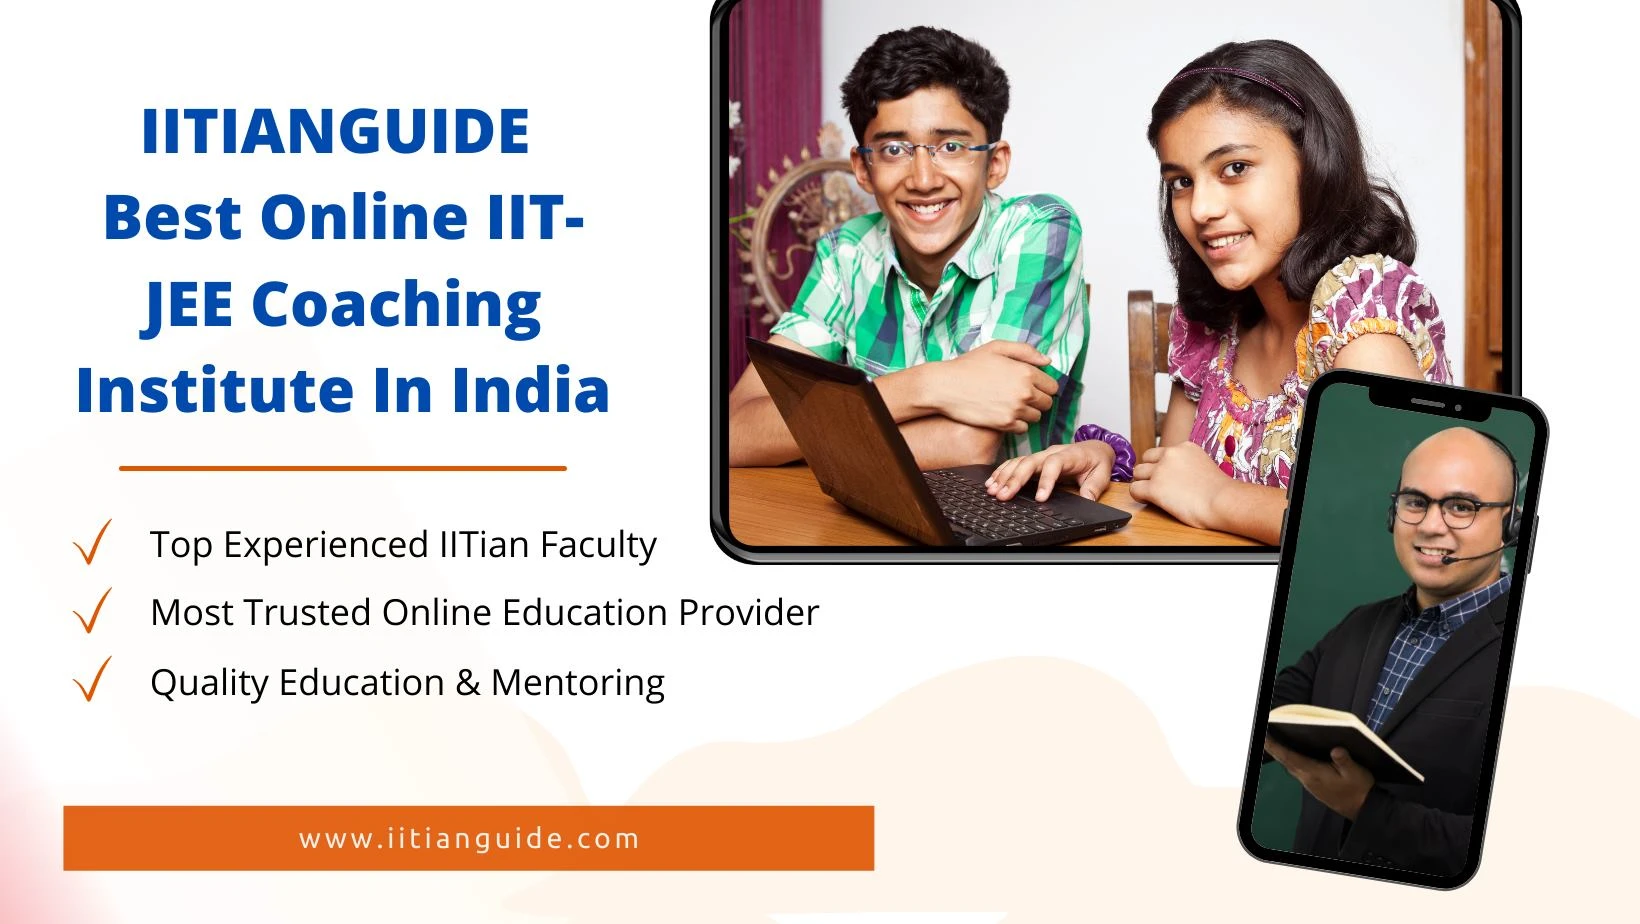 IITIANGUIDE – Revolutionizing Online IIT-JEE Coaching in INDIA through Emotional Support to Students.